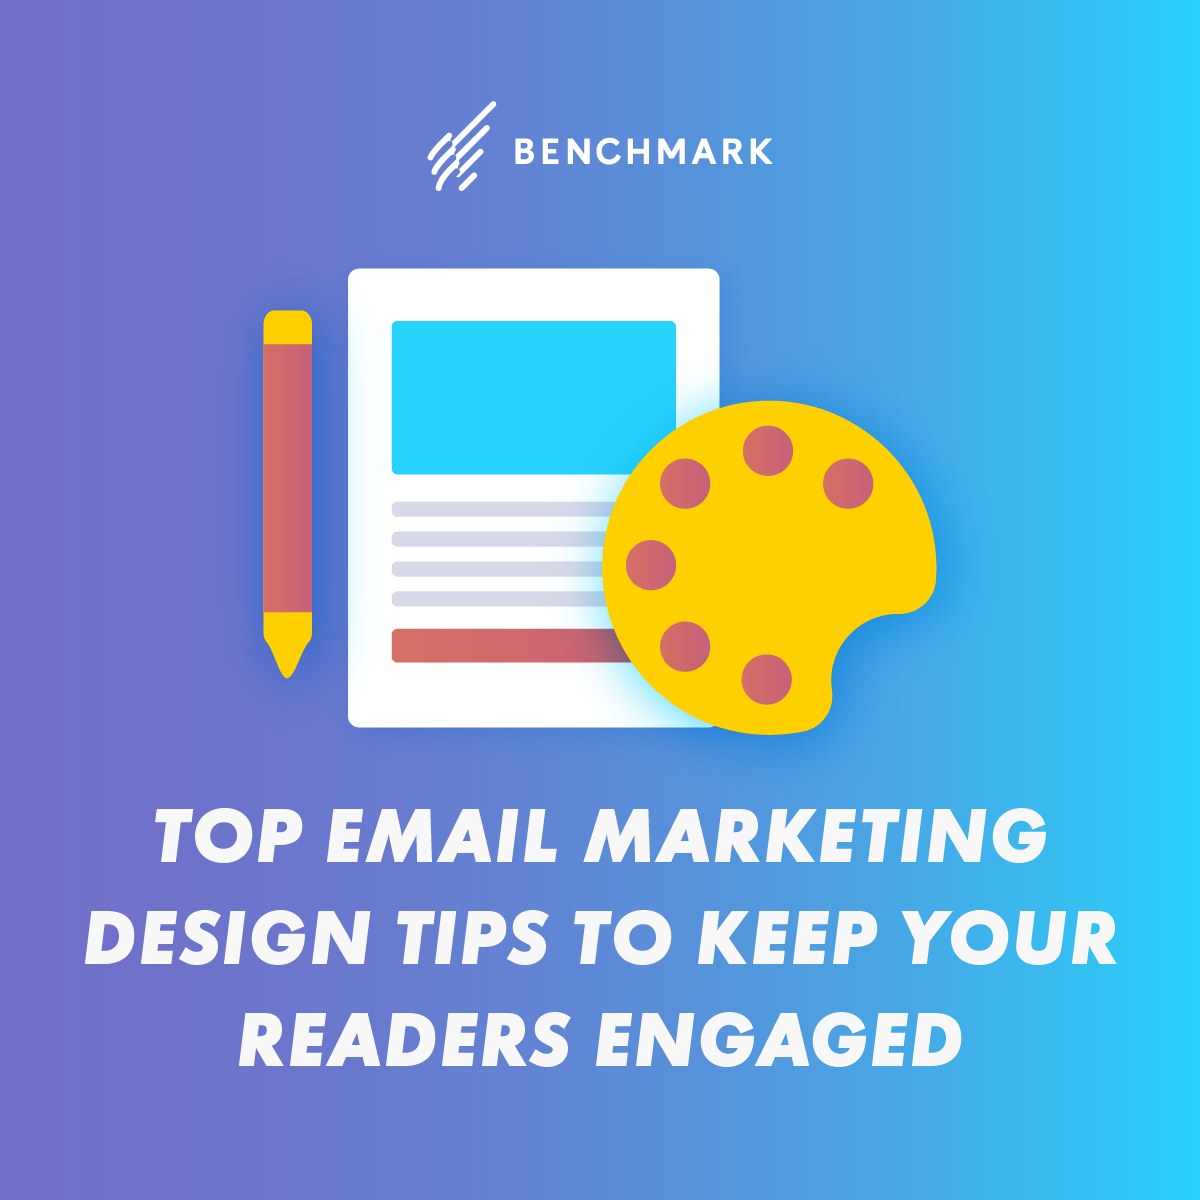 6 Top Email Marketing Design Tips to Keep Your Readers Engaged